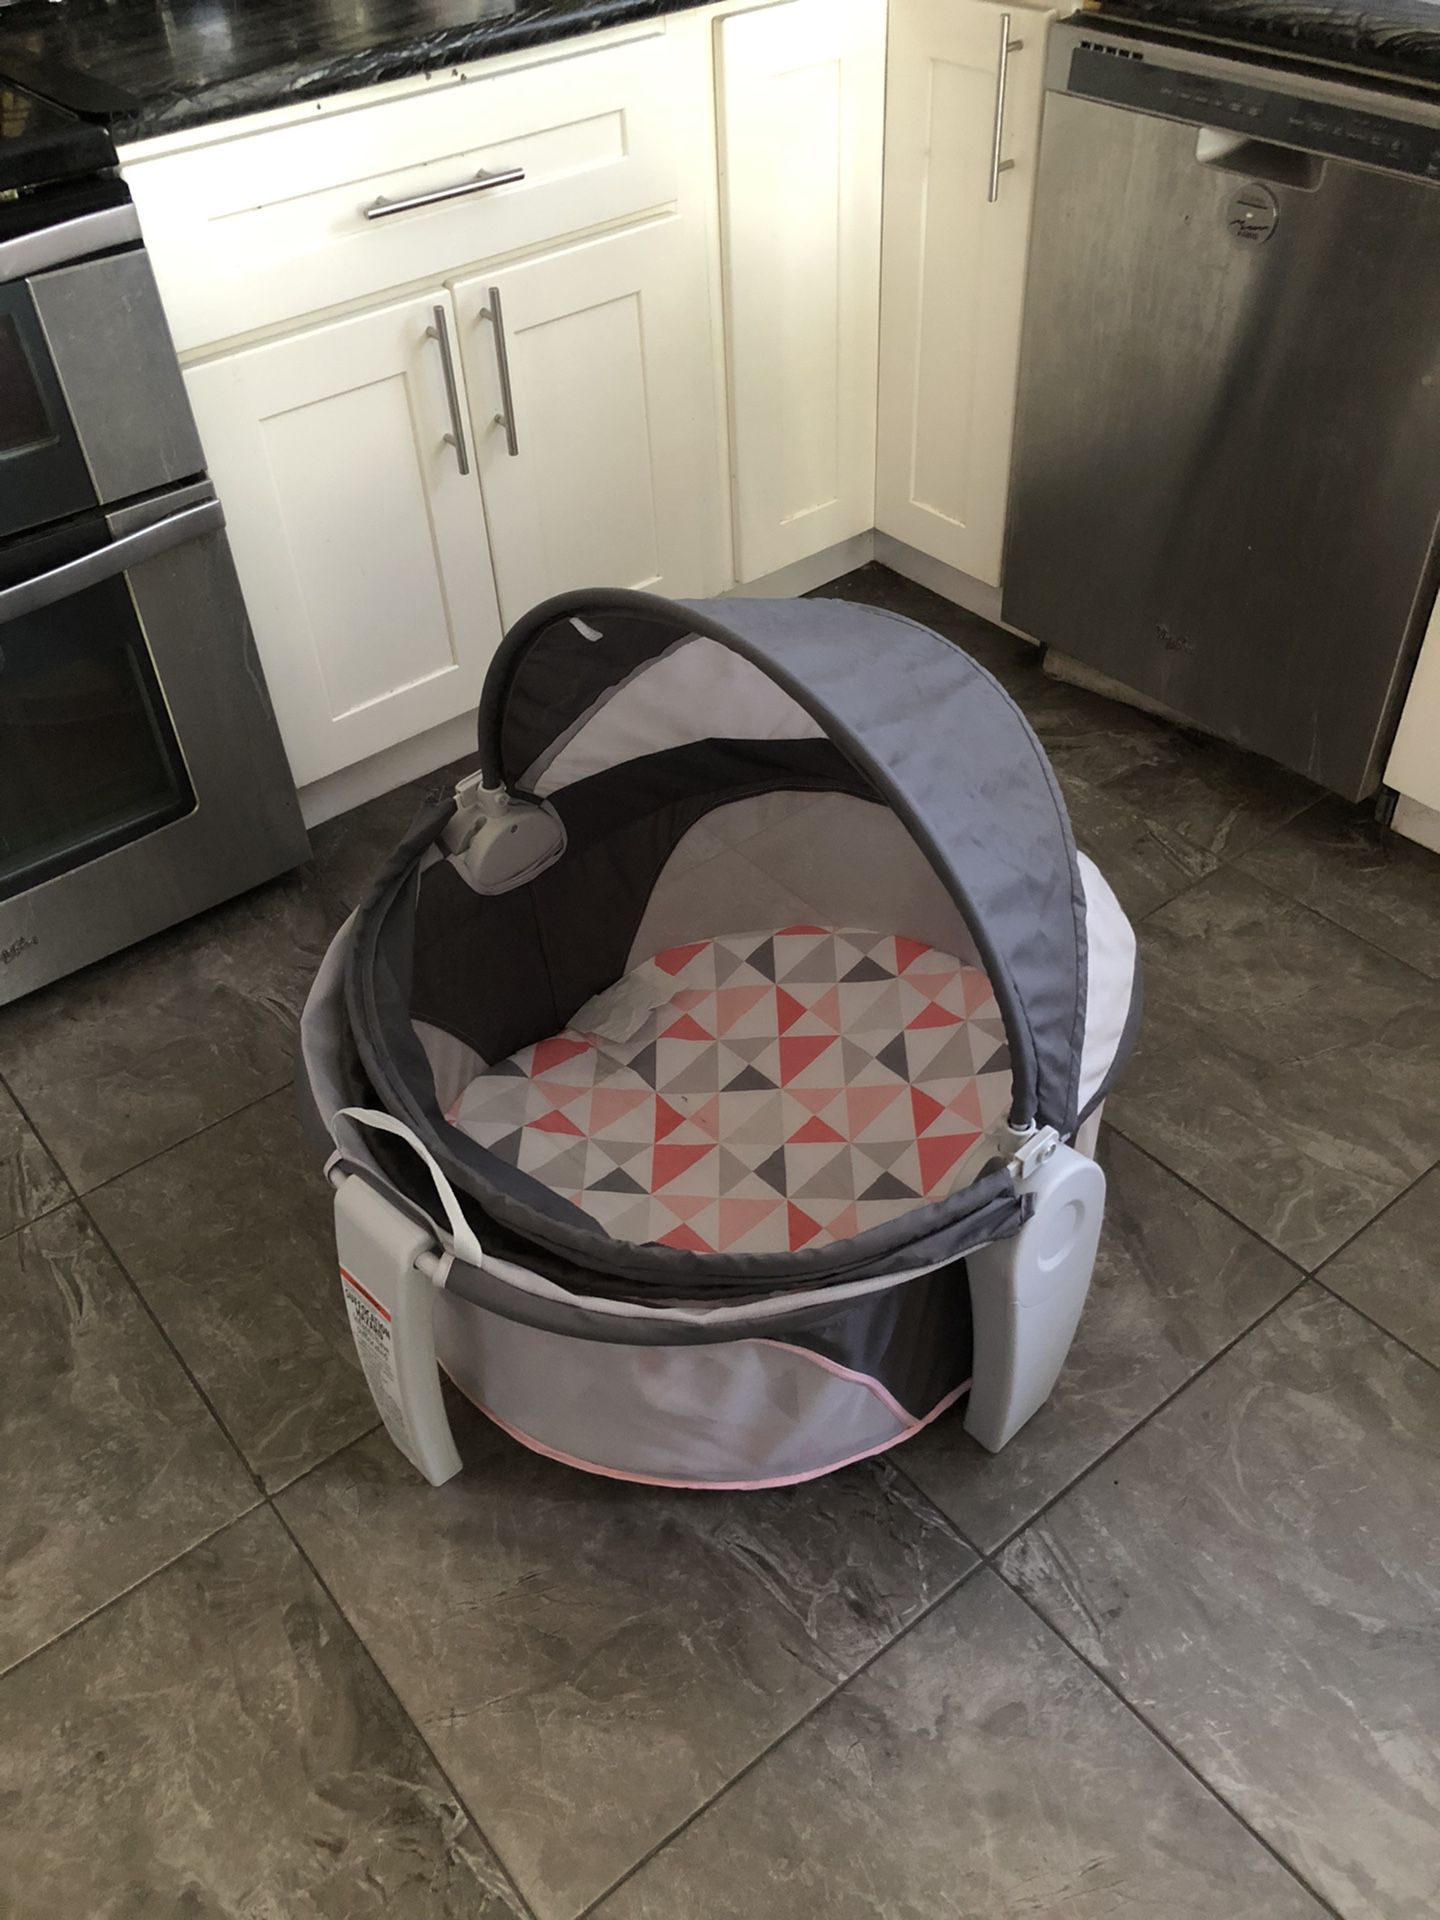 Fisher-Price On-the-Go Baby Dome - Portable bassinet  - $35